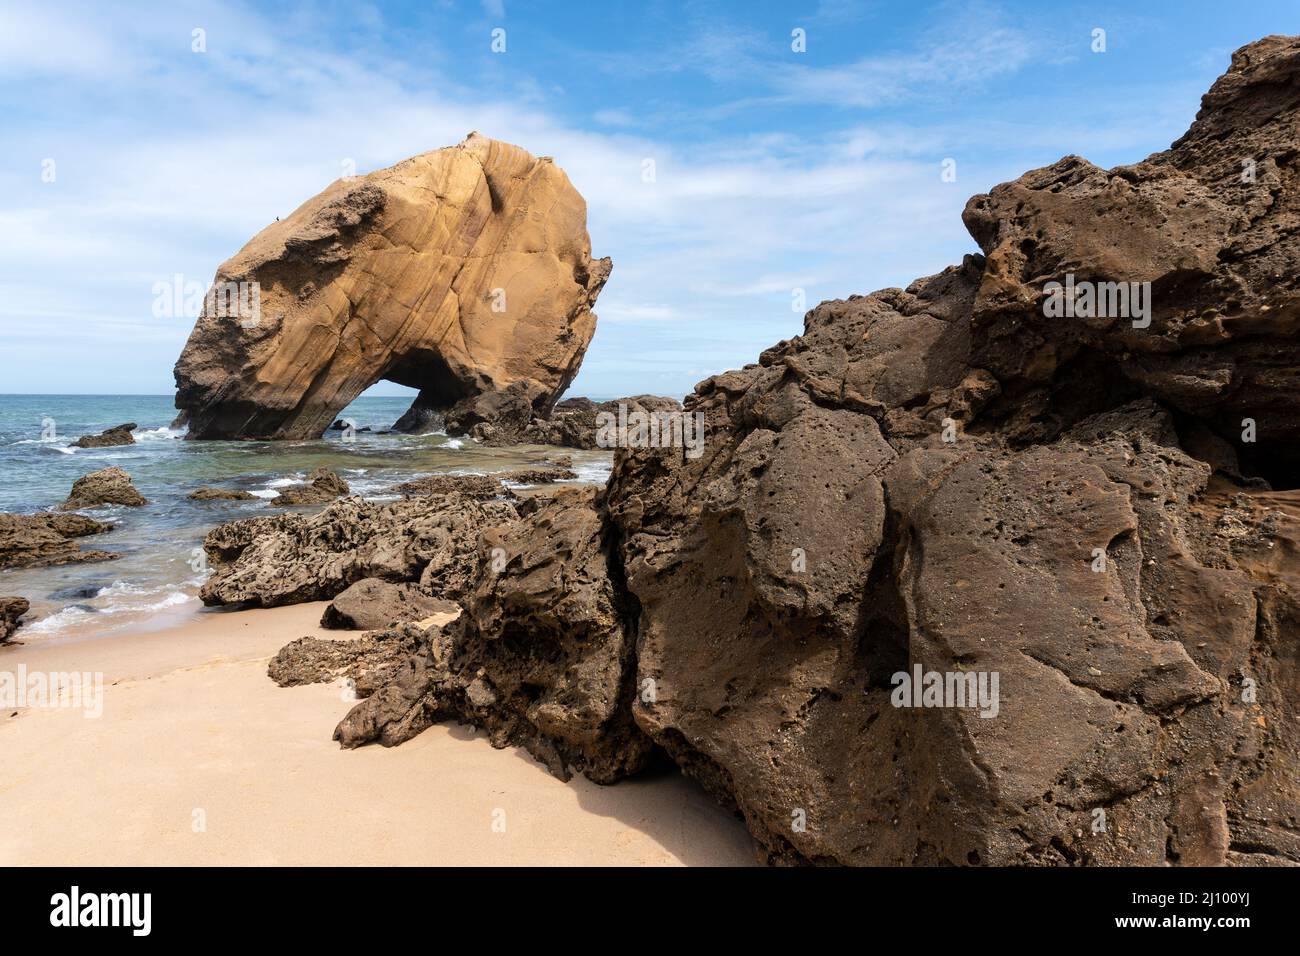 Santa Cruz beach with its famous natural arch formation at sunset, Portugal. Stock Photo